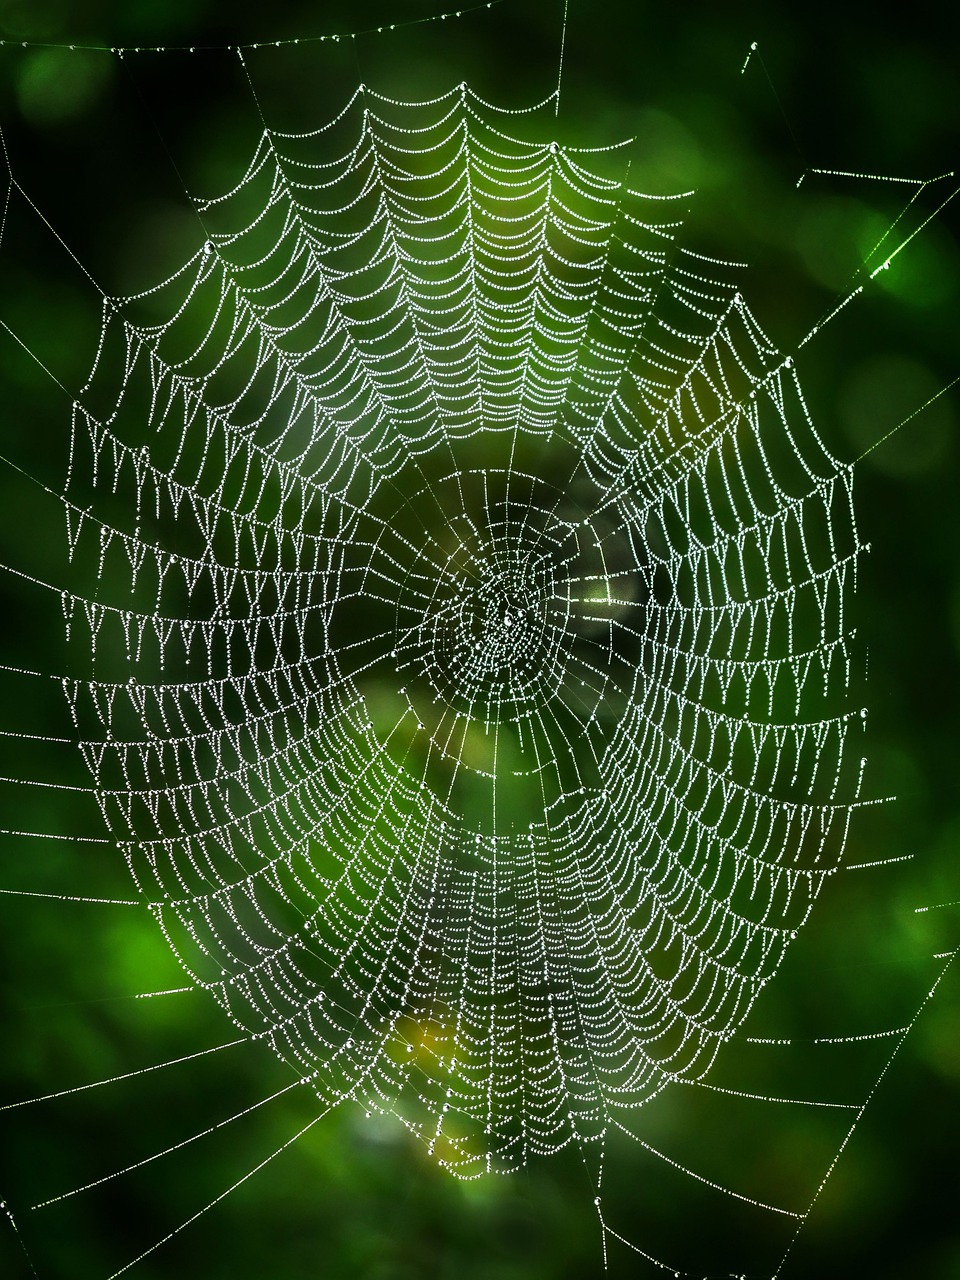 Advanced Macro Techniques for Capturing Spider Webs